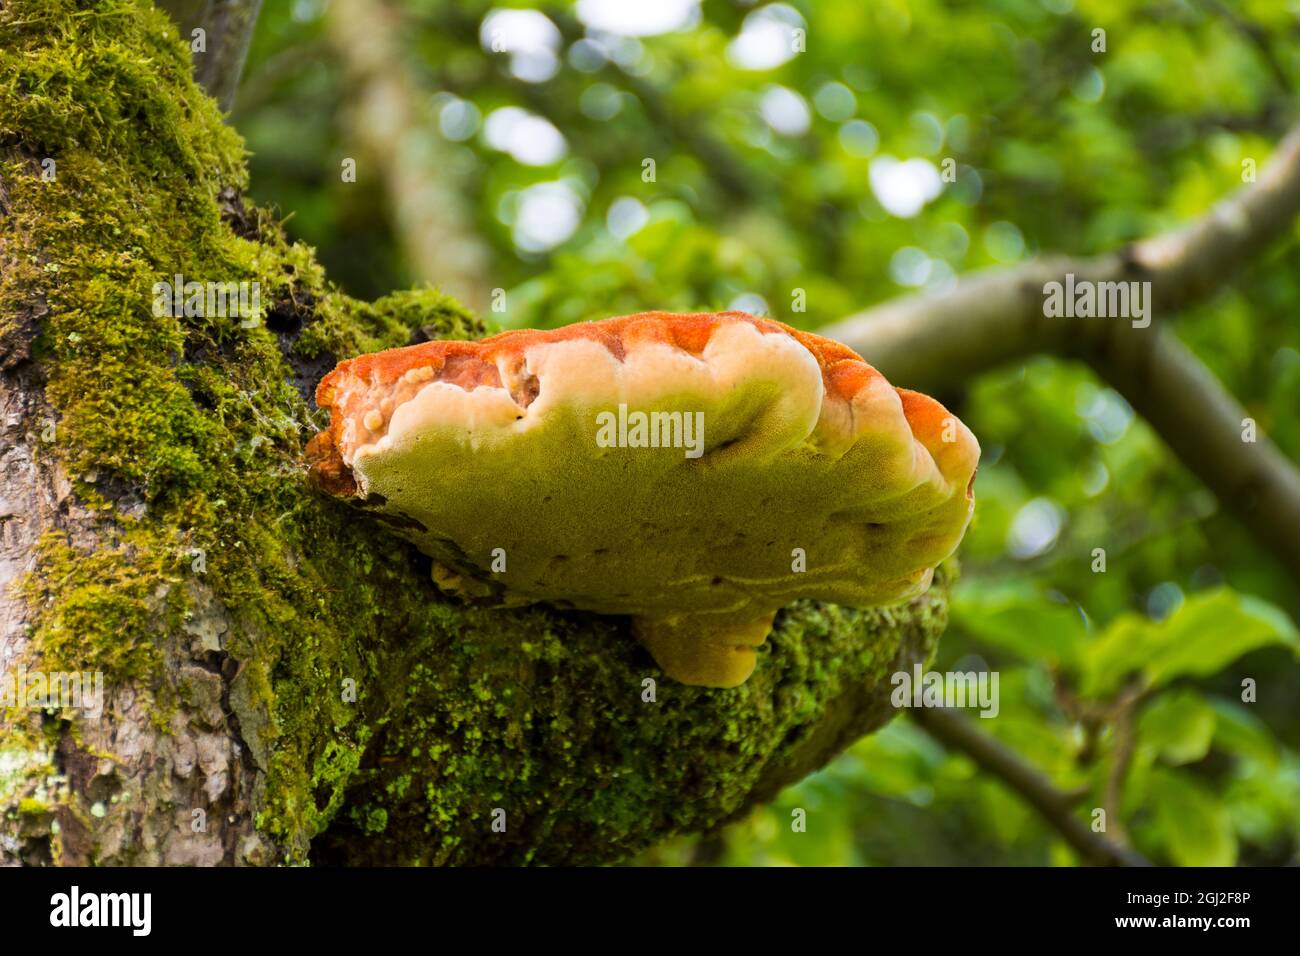 Chicken Of The Woods (Laetiporus sulphureus) is an edible polypore mushroom here growing on an apple tree Stock Photo